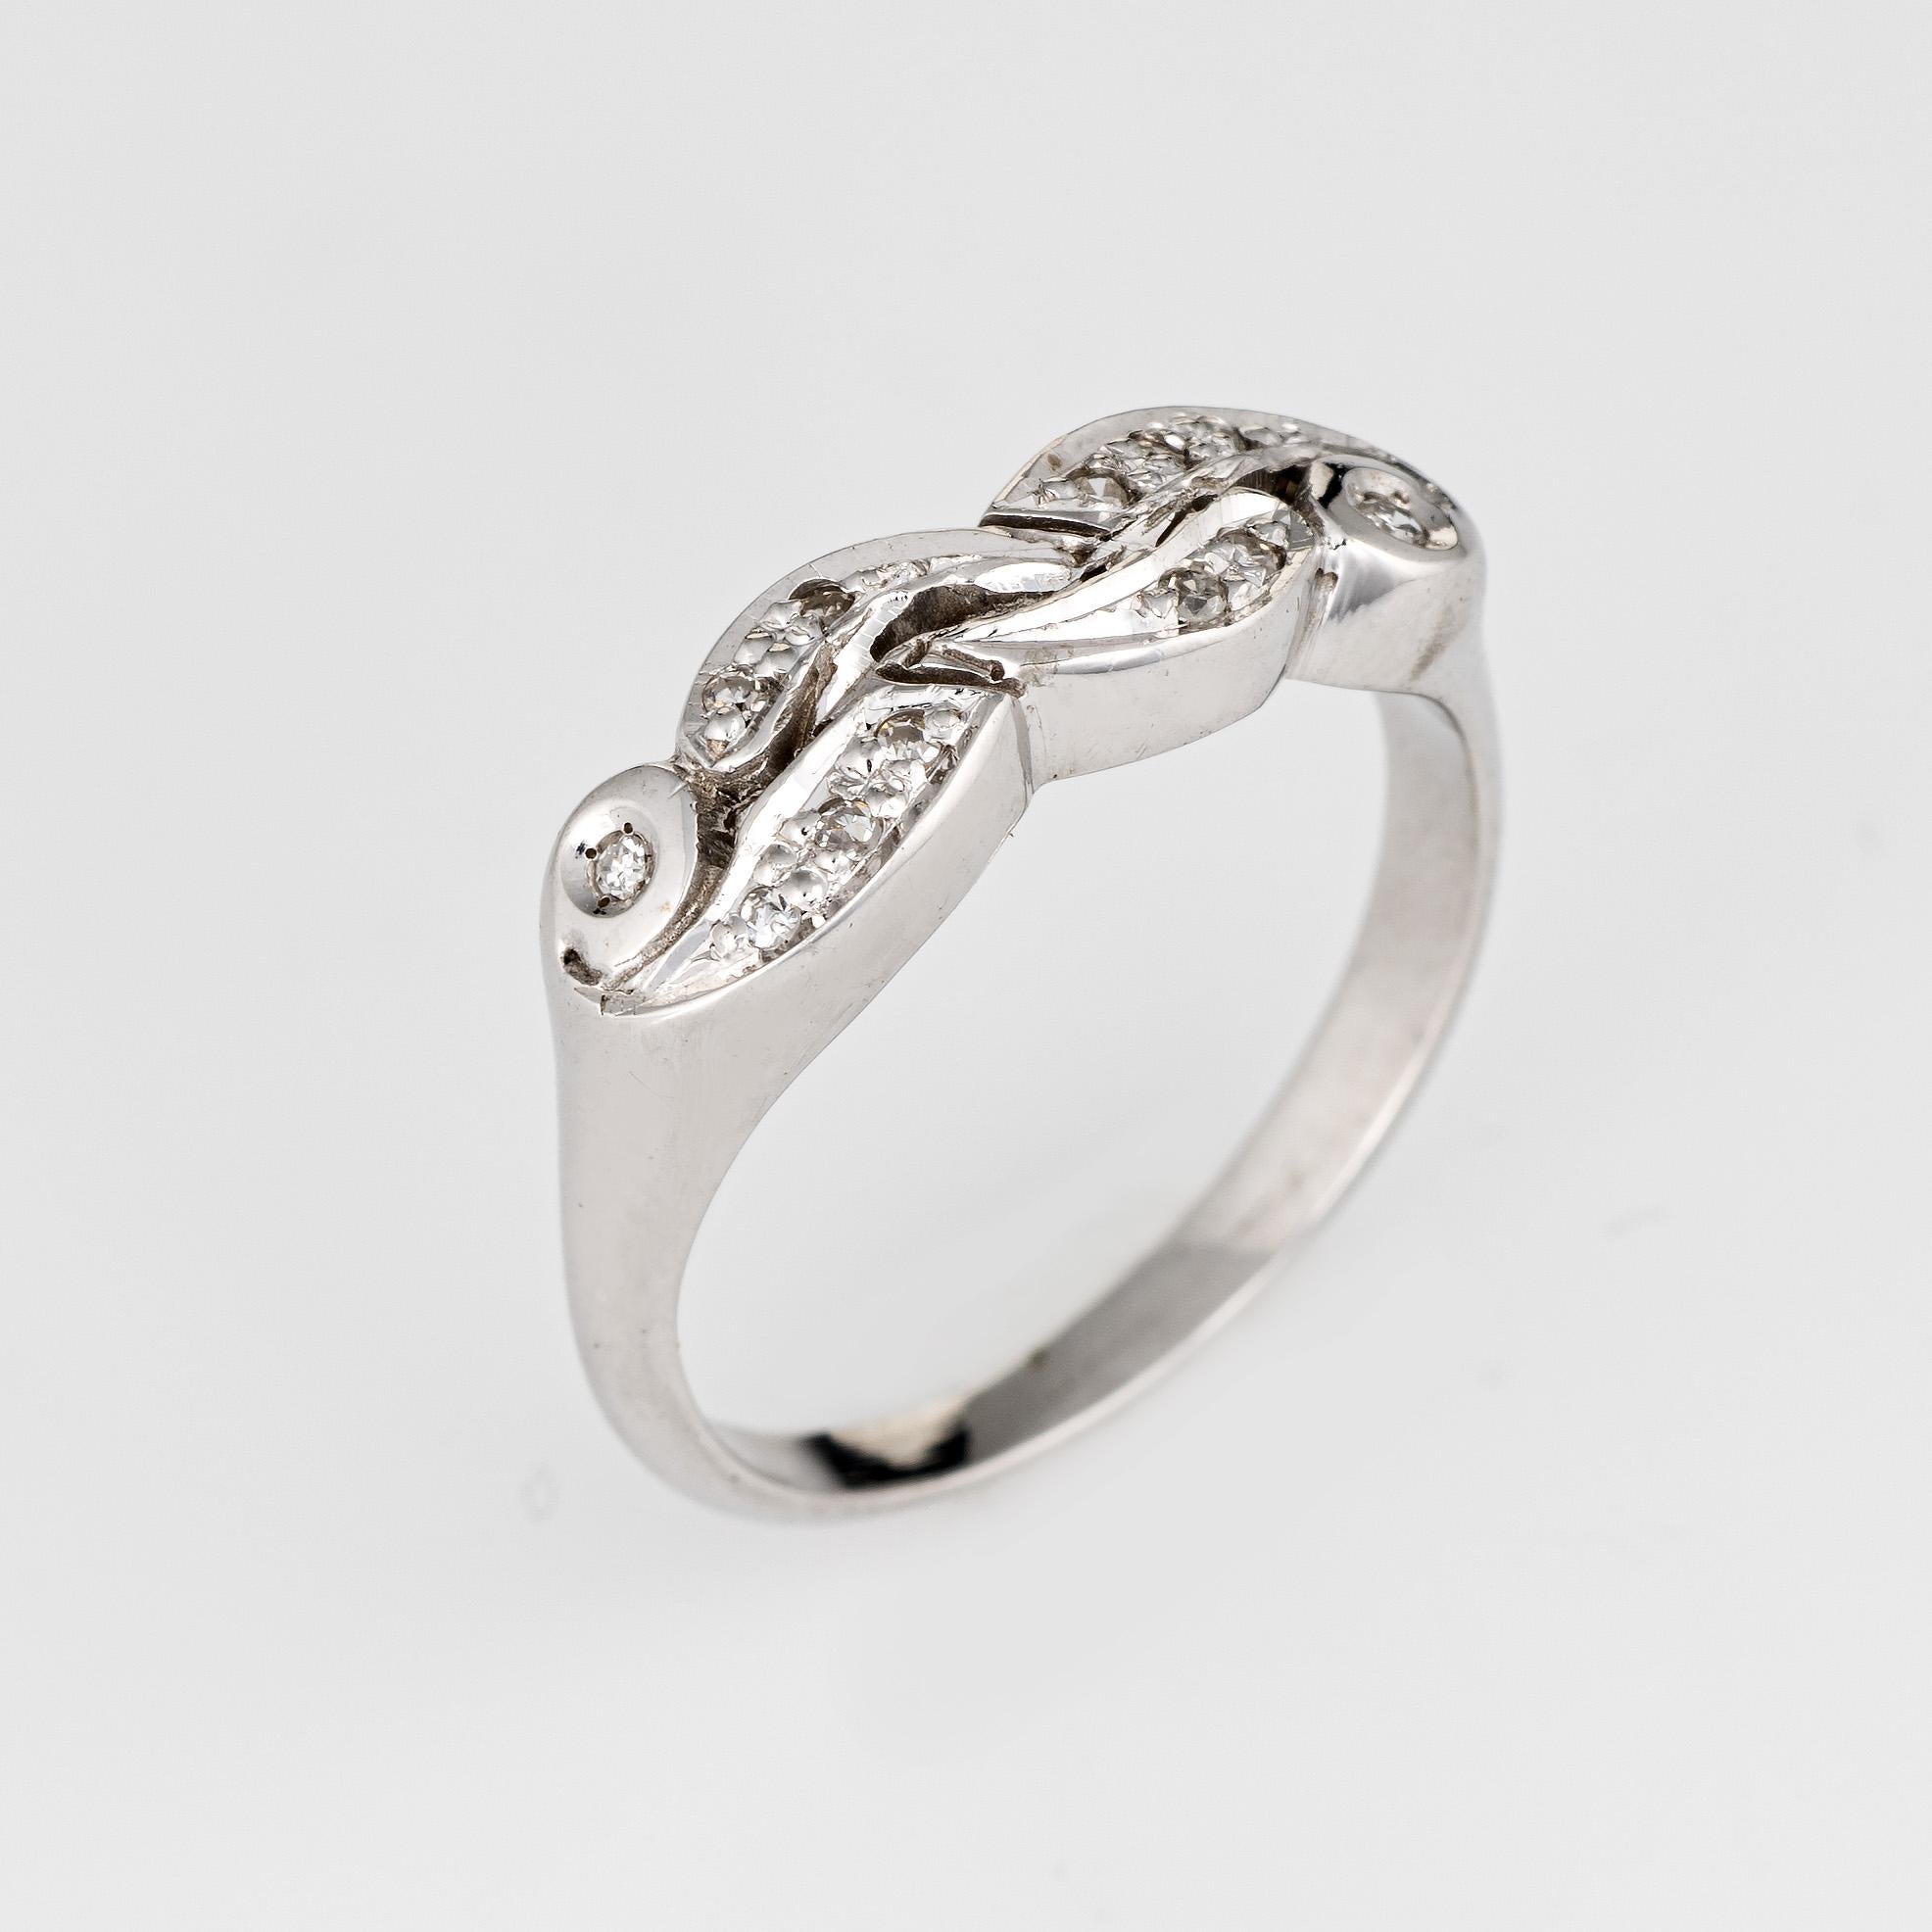 Elegant vintage diamond wedding band (circa 1940s to 1950s) crafted in 14 karat white gold. 

12 diamonds total an estimated 0.06 carats (estimated at I-J color and SI2 clarity).

The ring epitomizes vintage charm and would make a lovely alternative